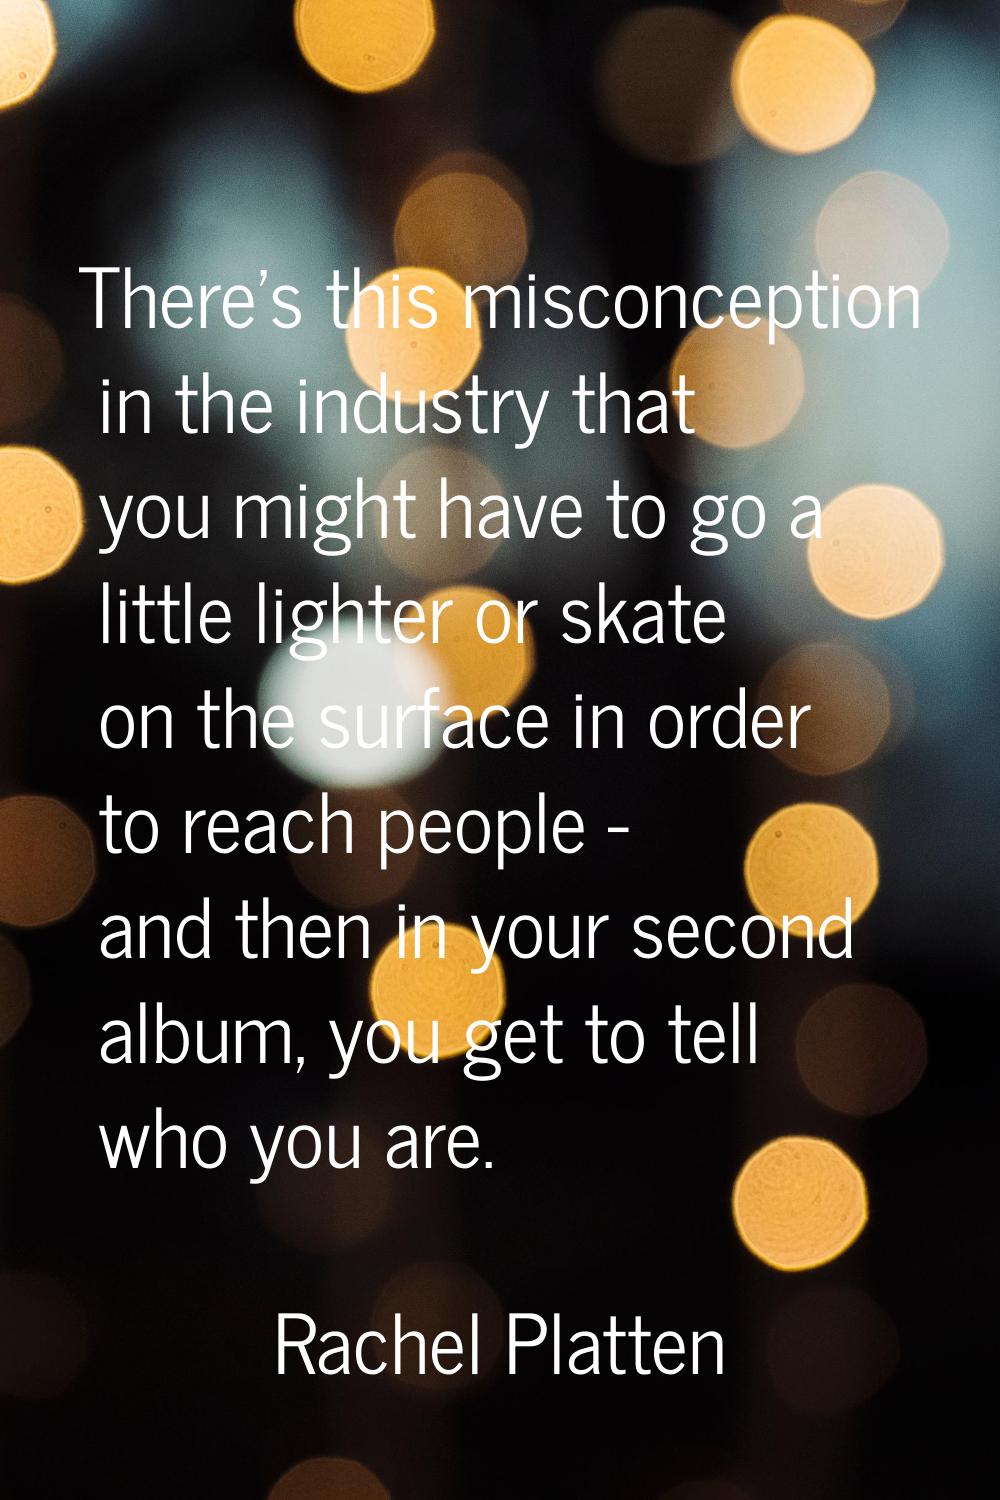 There's this misconception in the industry that you might have to go a little lighter or skate on t